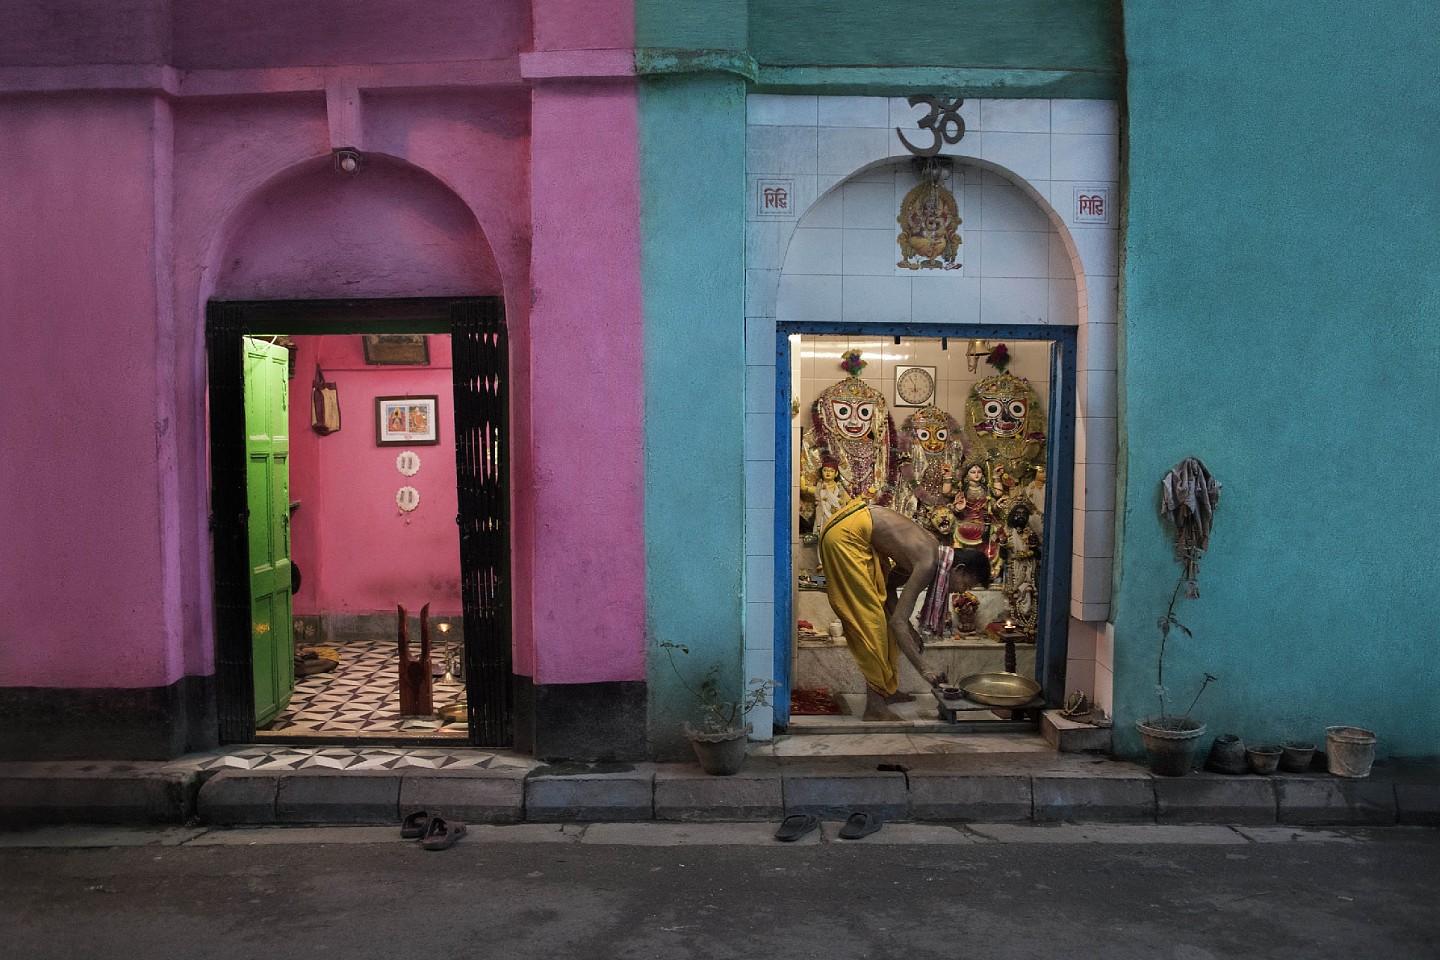 Steve McCurry, Hindu Priest Prepares for Puja, 2018
FujiFlex Crystal Archive Print
Price/Size on request